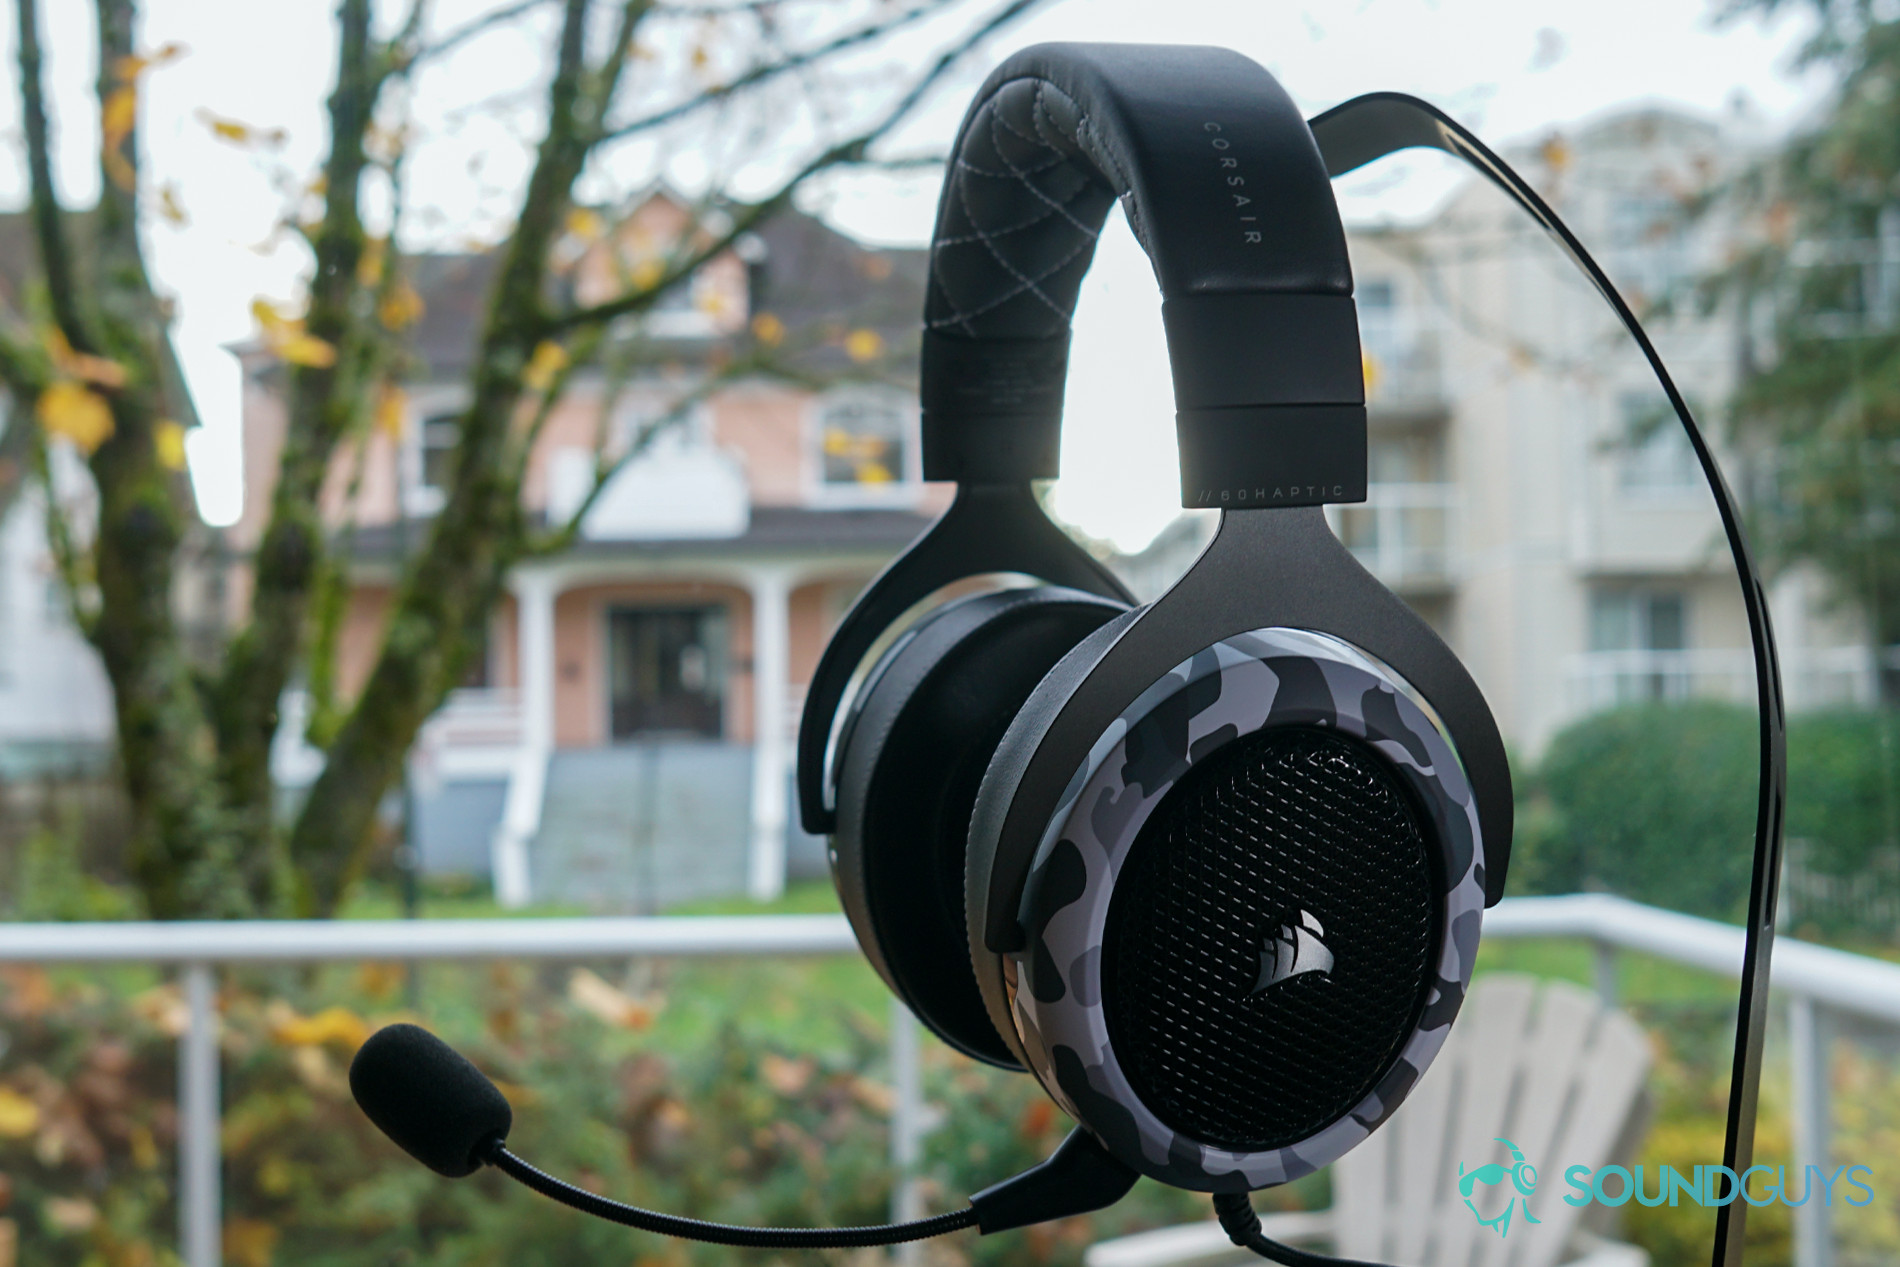 HS60 Haptic review: Feel it all SoundGuys